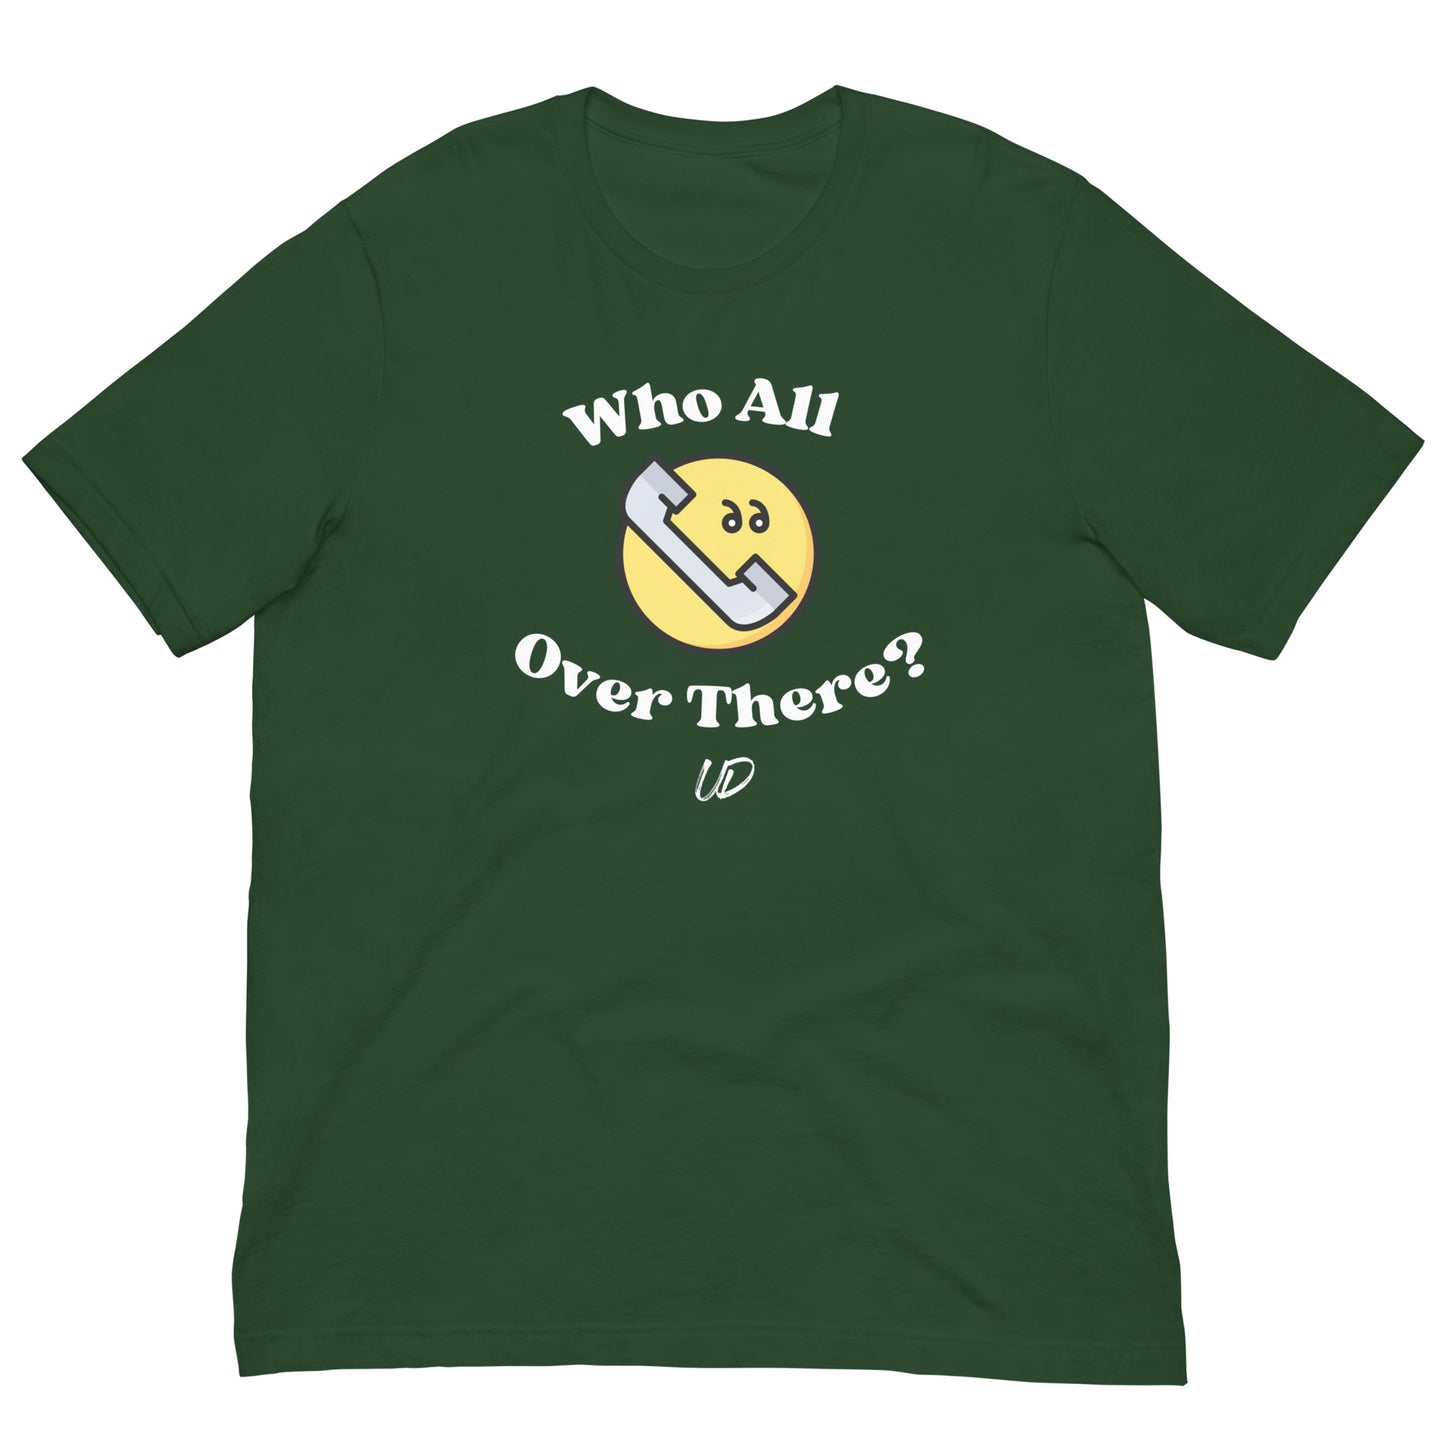 Who All Over There T-Shirt